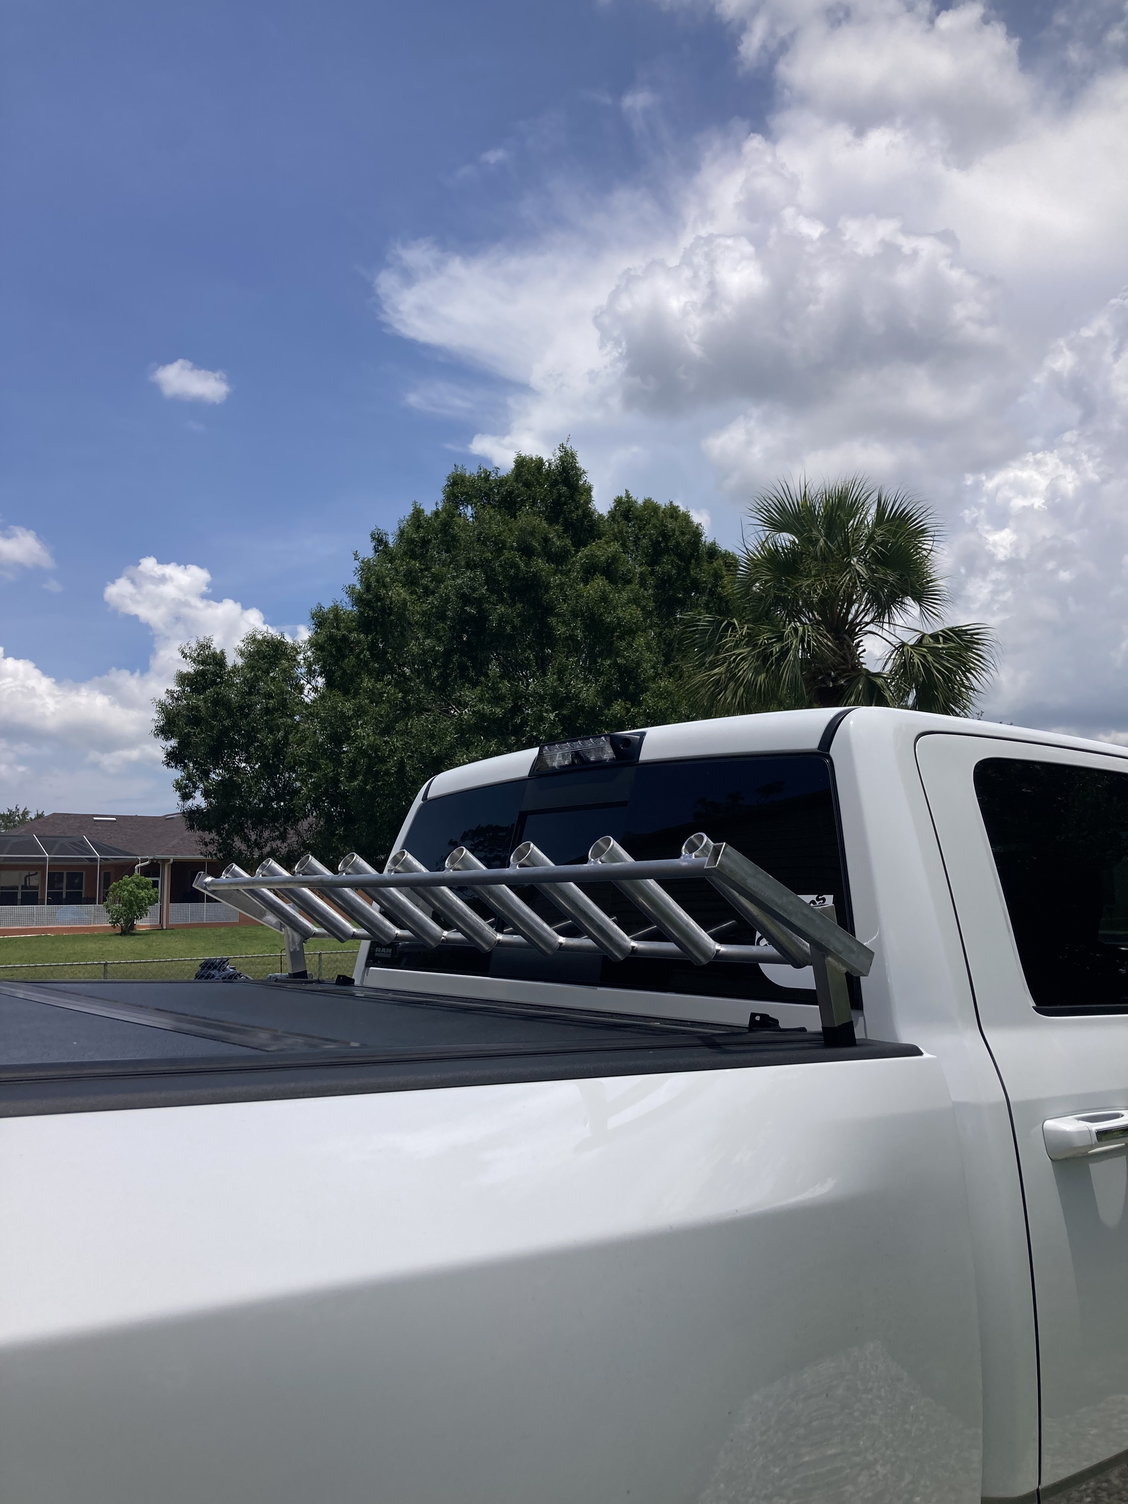 Truck Rod Rack - The Hull Truth - Boating and Fishing Forum